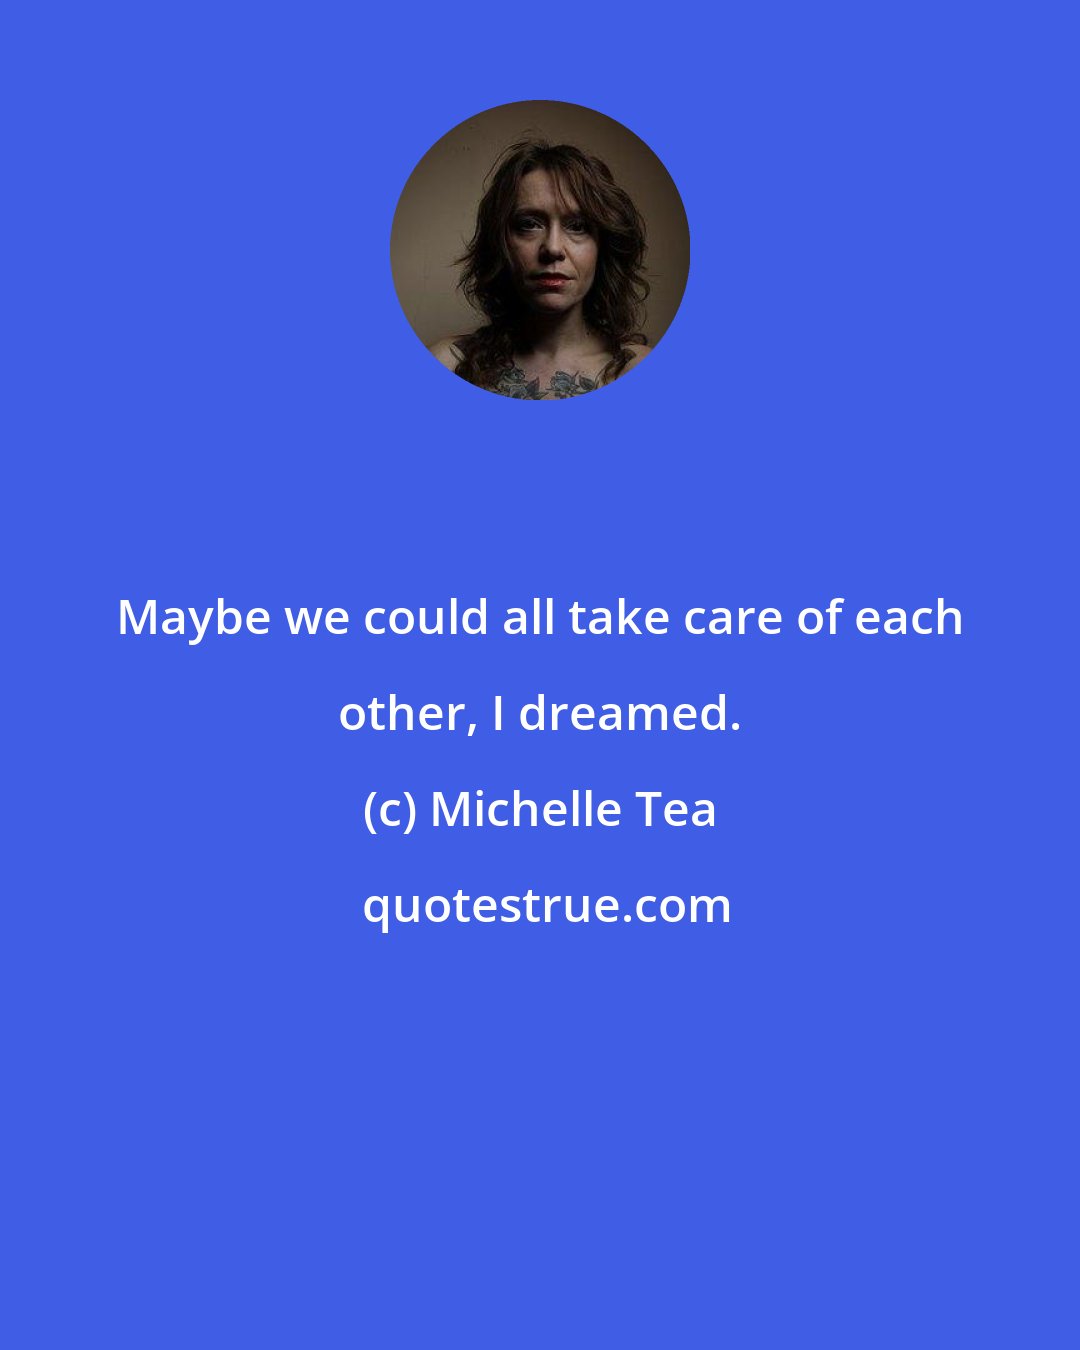 Michelle Tea: Maybe we could all take care of each other, I dreamed.